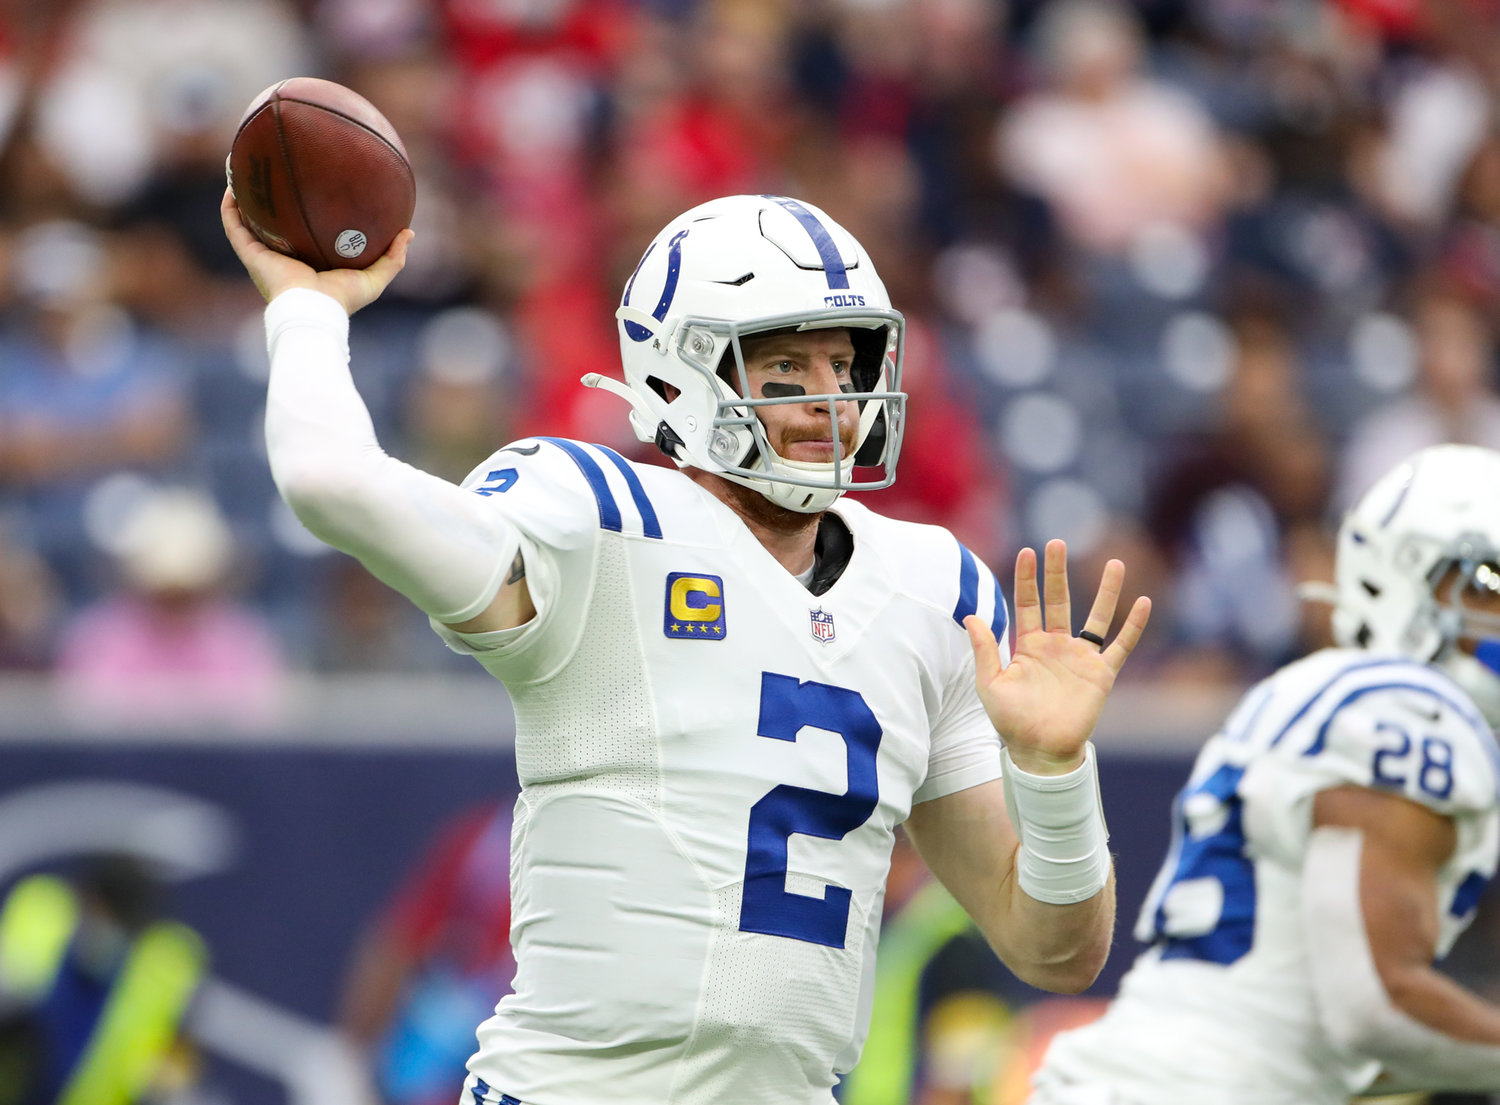 Indianapolis Colts quarterback Carson Wentz (2) passes the ball during an NFL game between the Texans and the Colts on December 5, 2021 in Houston, Texas.